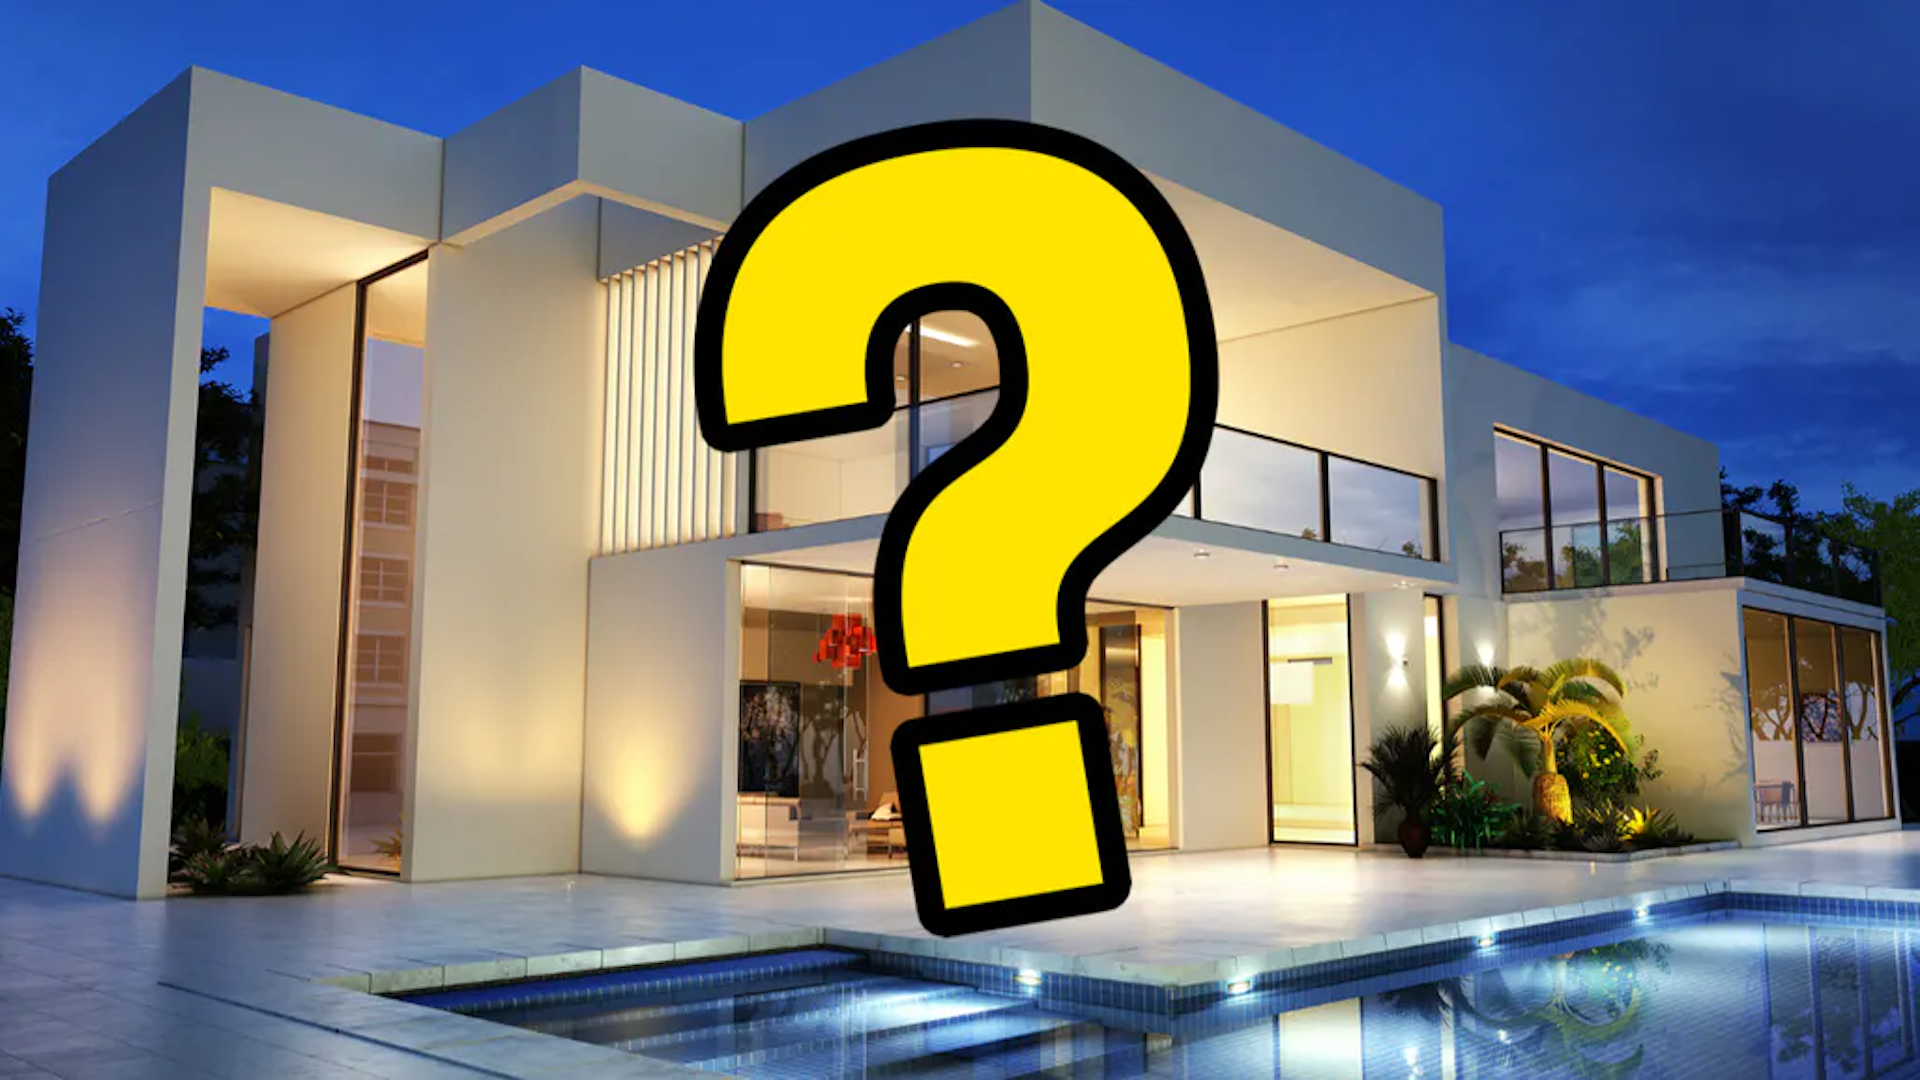 Posh mansion with a question mark